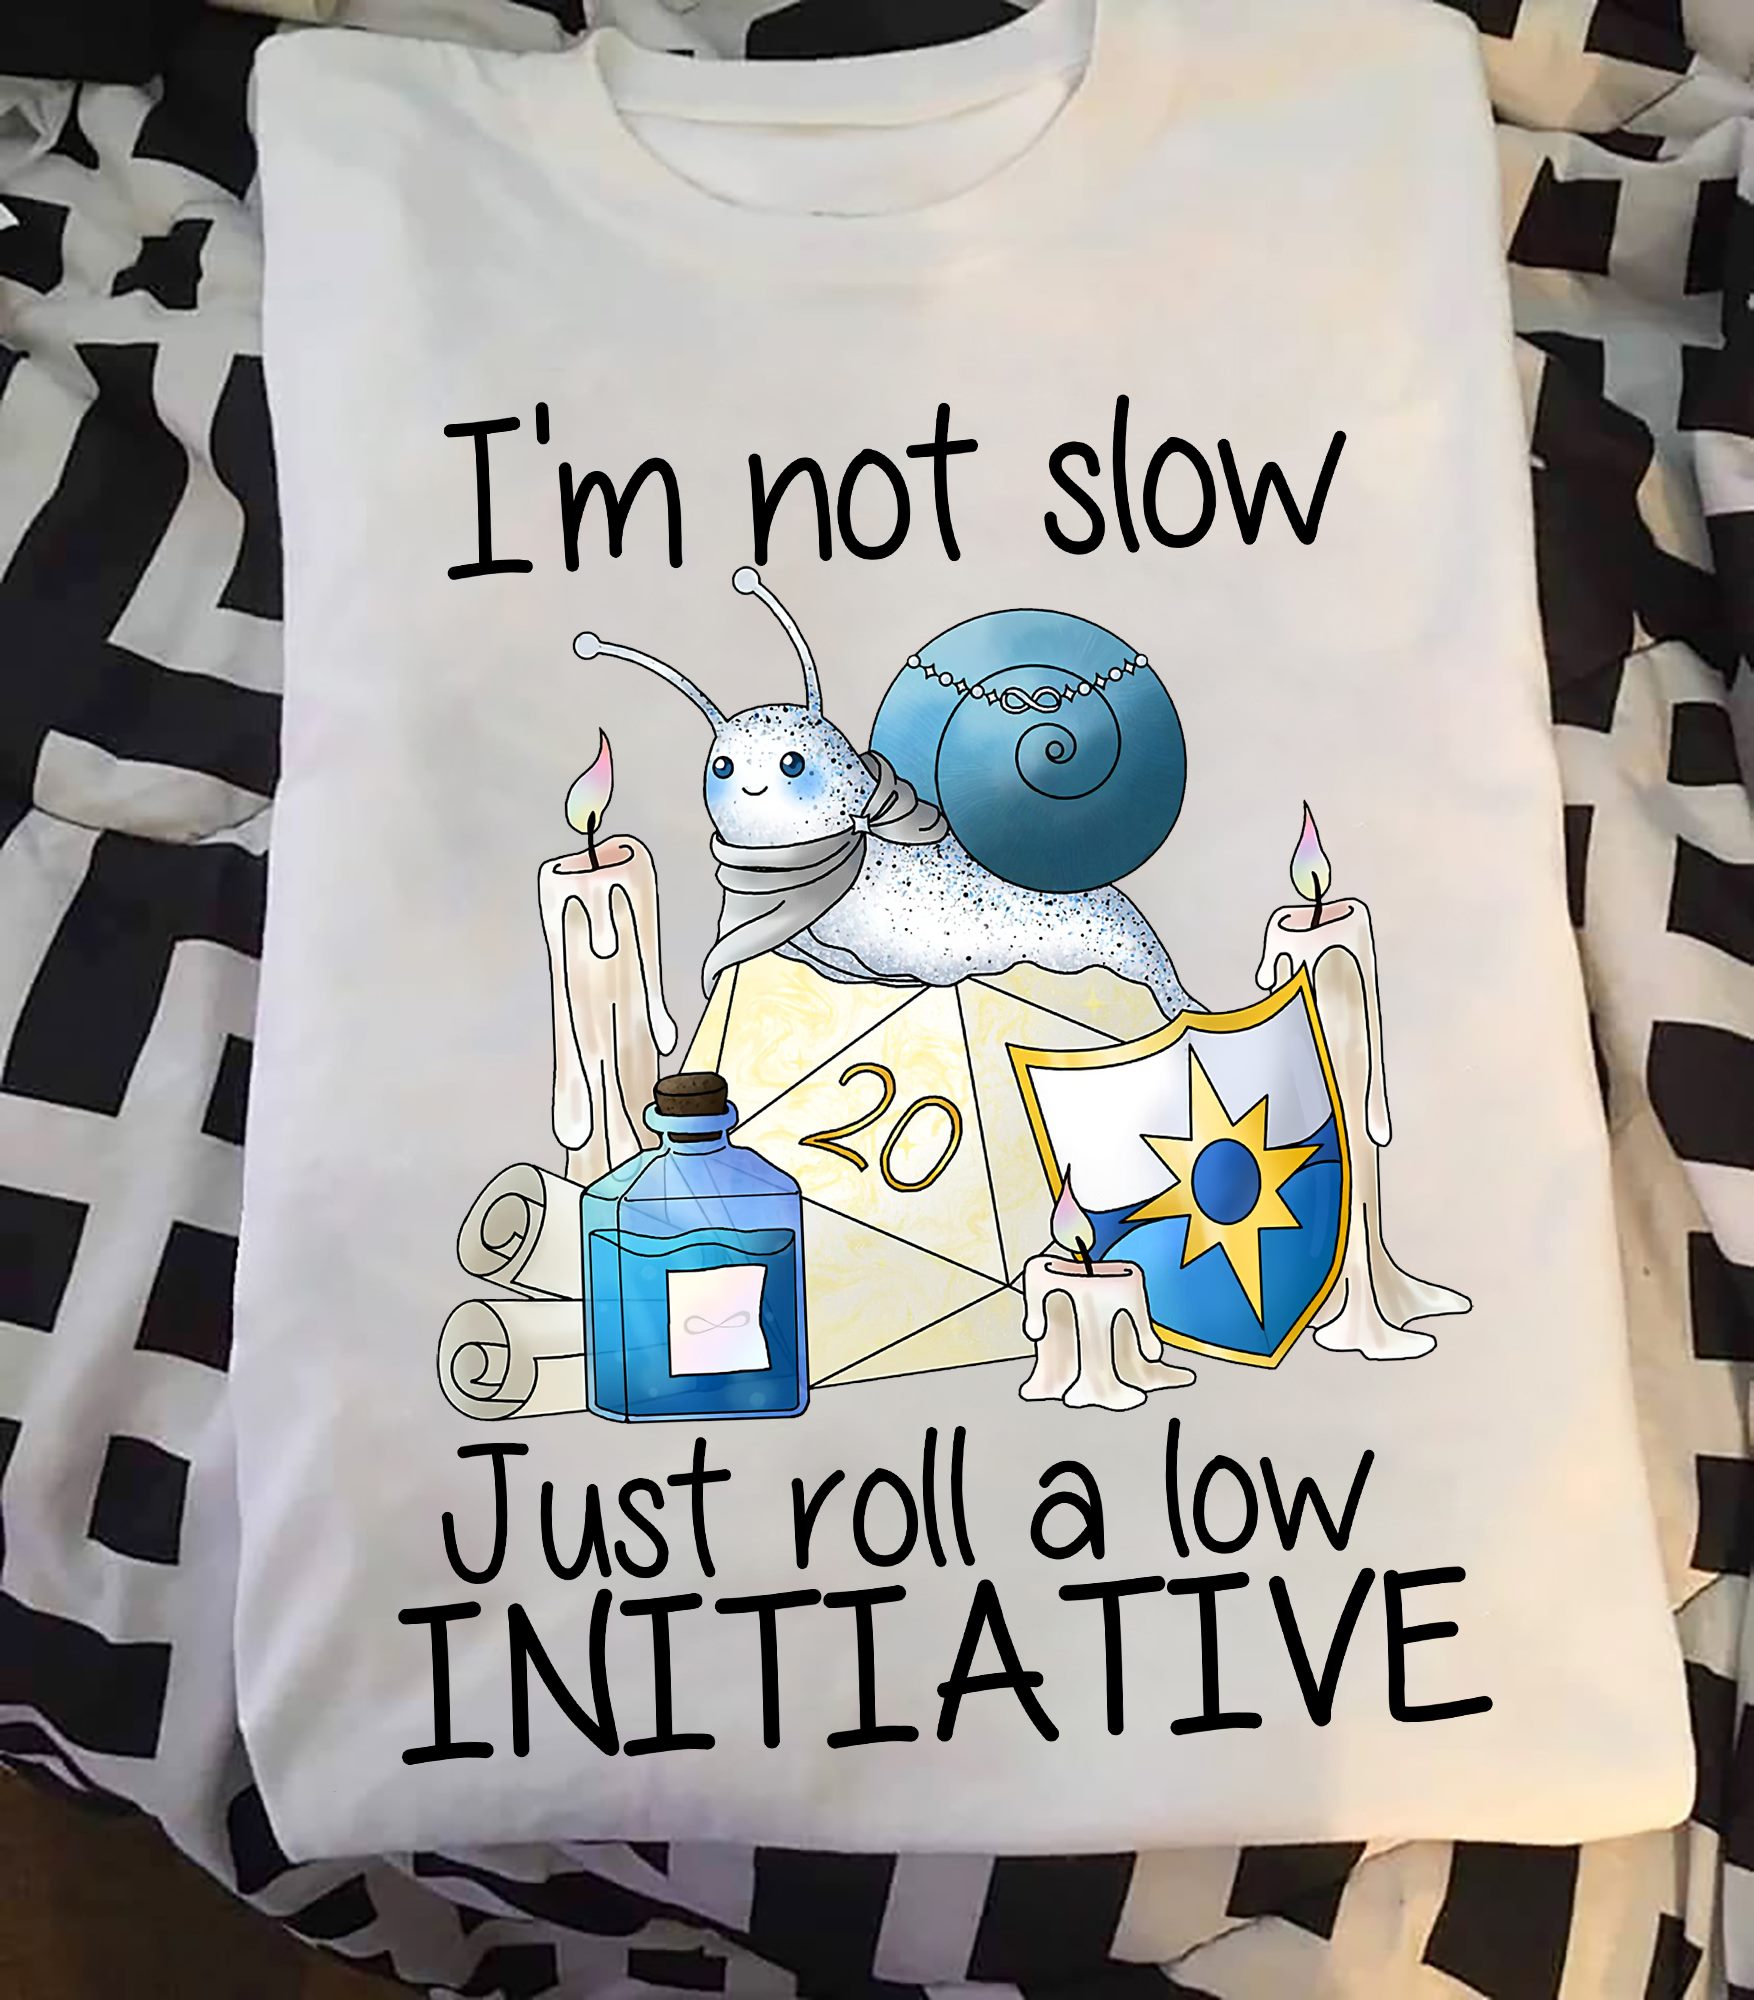 Love Snail- I'm not slow just roll a low initiative